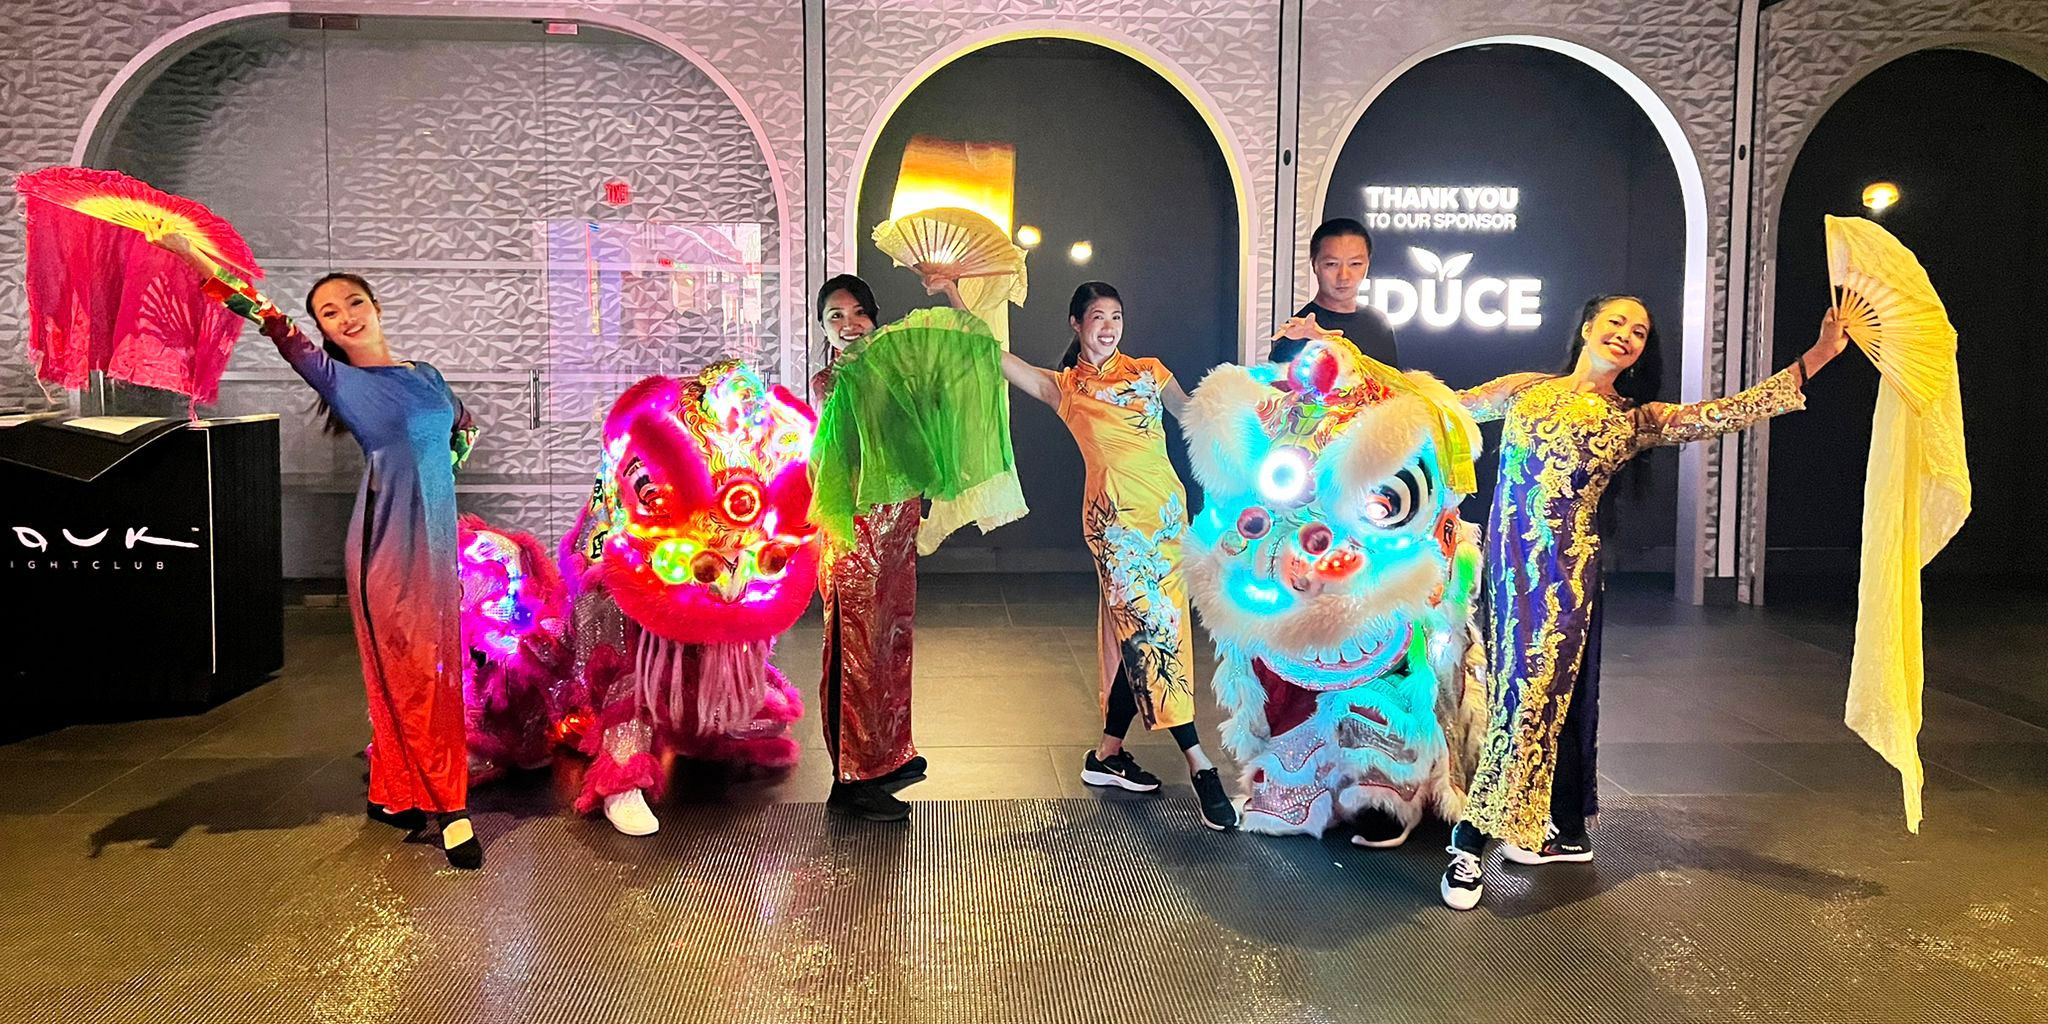 Chinese Themed Acts Captivate Vegas Audiences at Exclusive Corporate Event